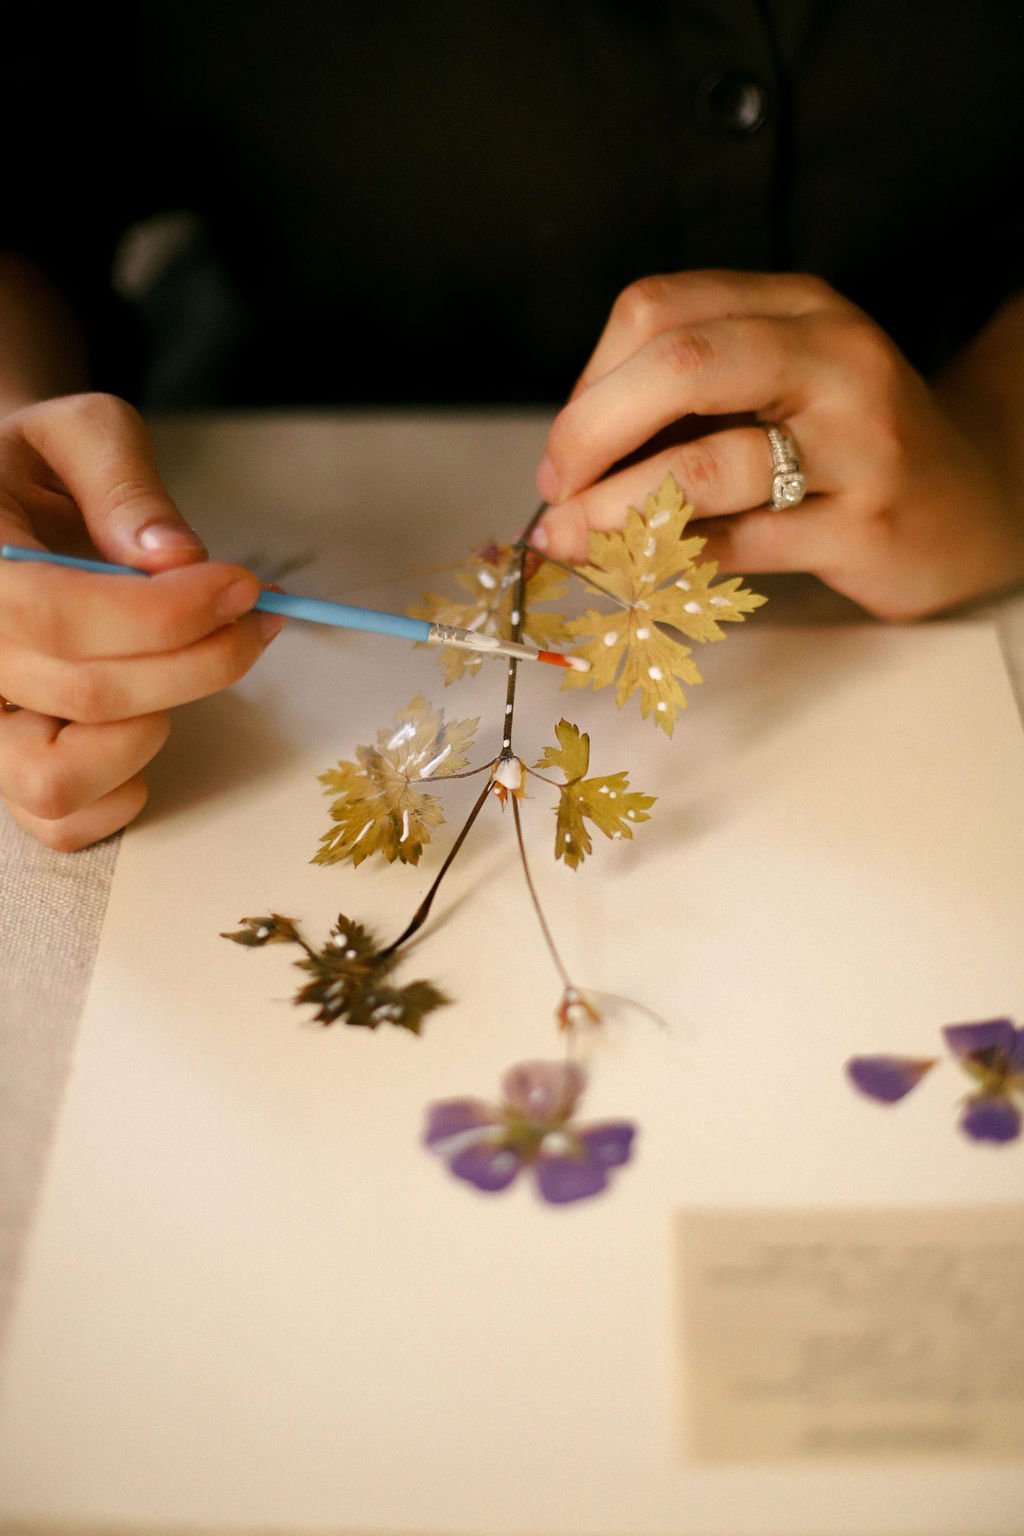 How to make pressed flowers and pressed flower art - Sweet Valley Acres